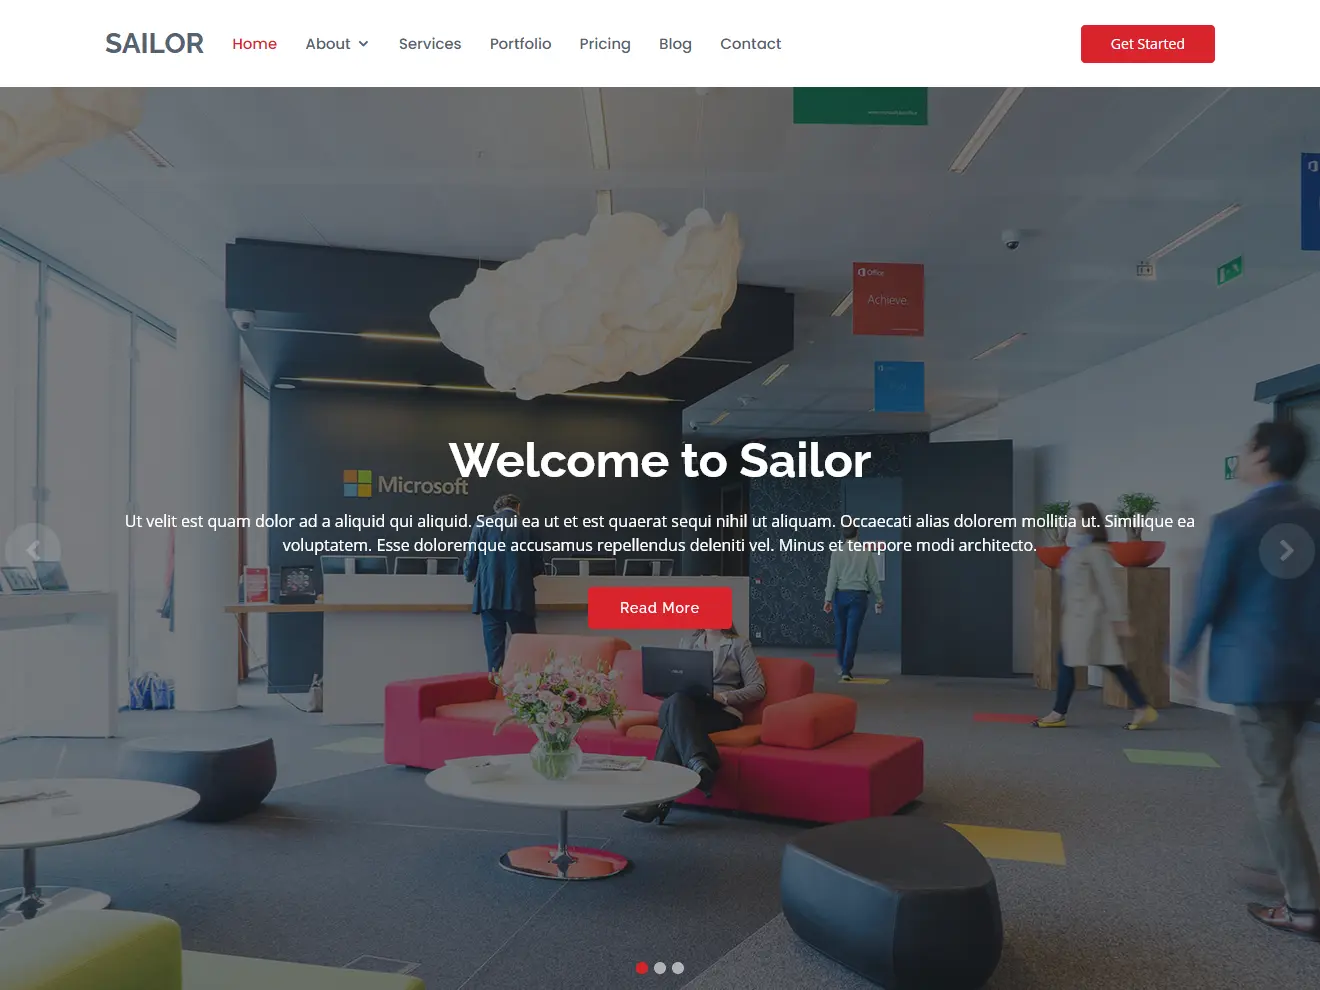 Sailor - Bootstrap Business Template